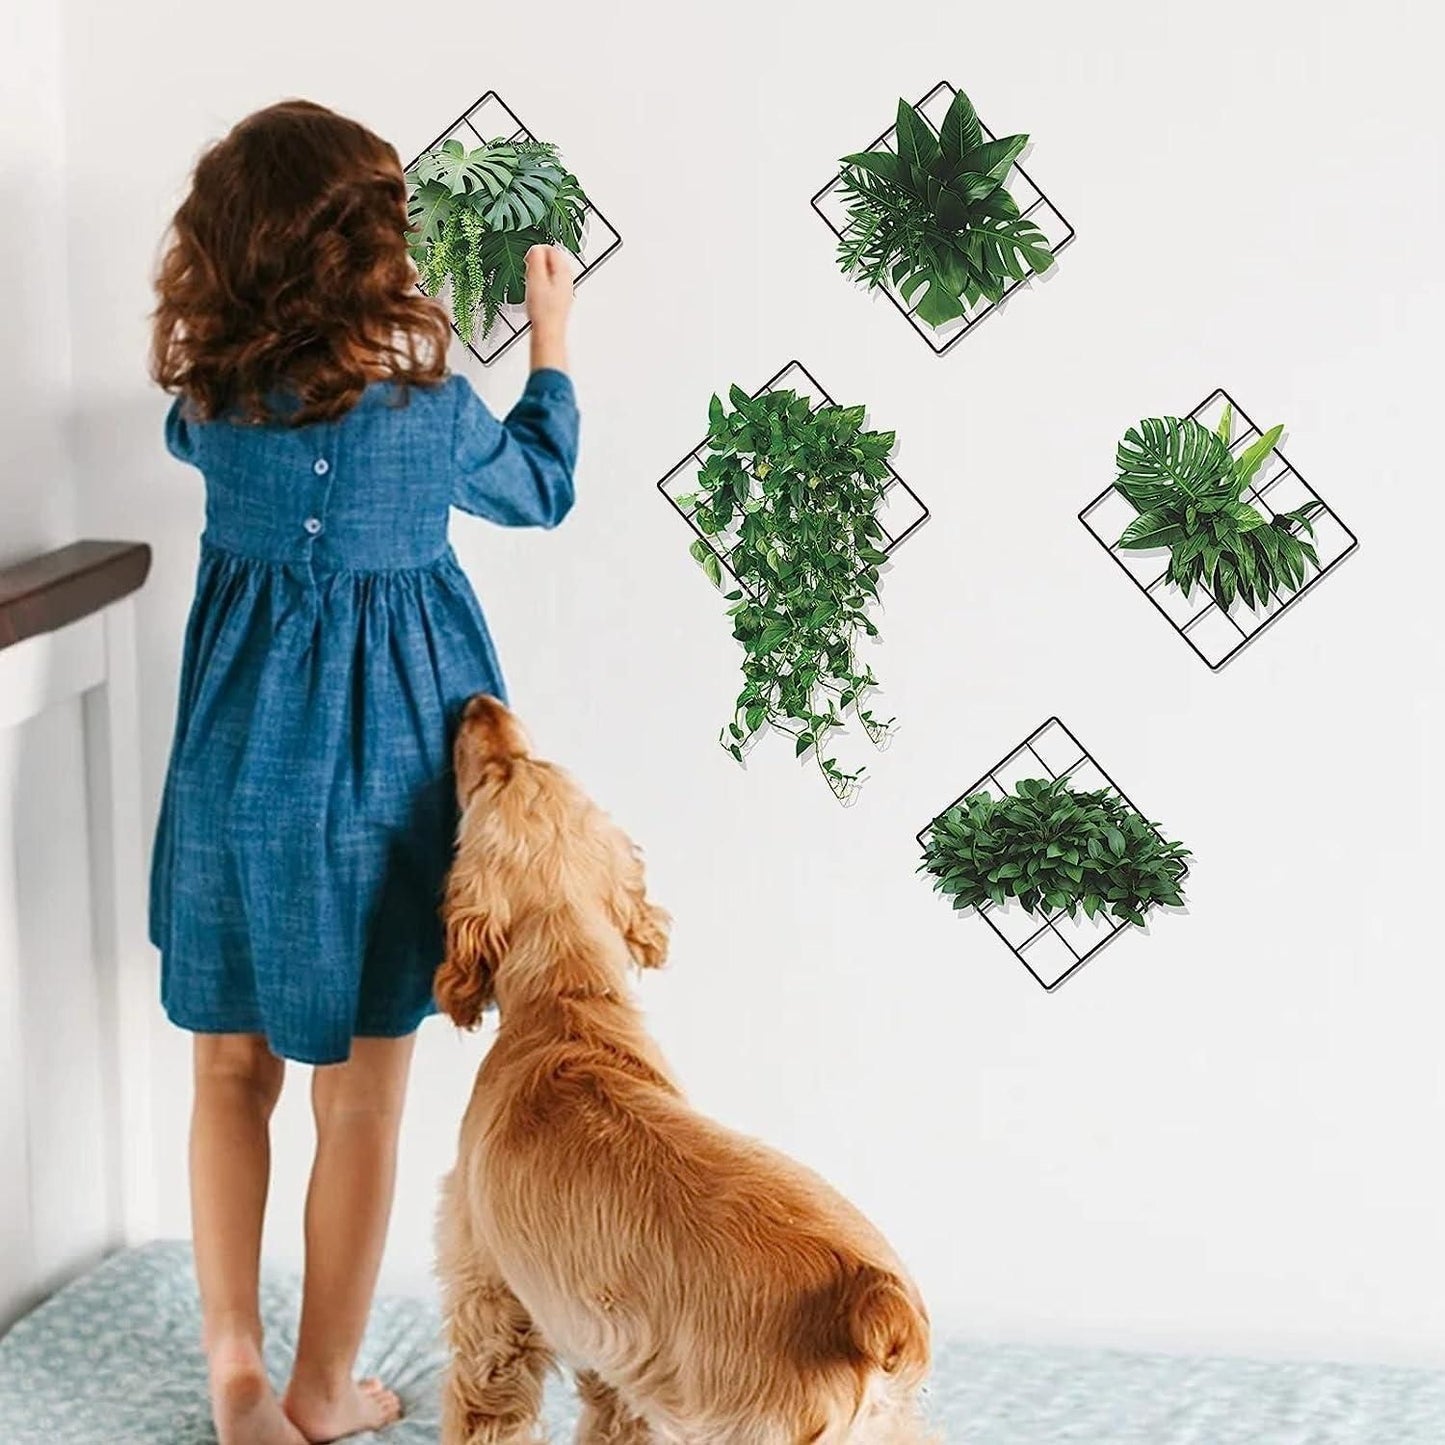 Set of 5 Leaves Design Vinyl Wall Stickers